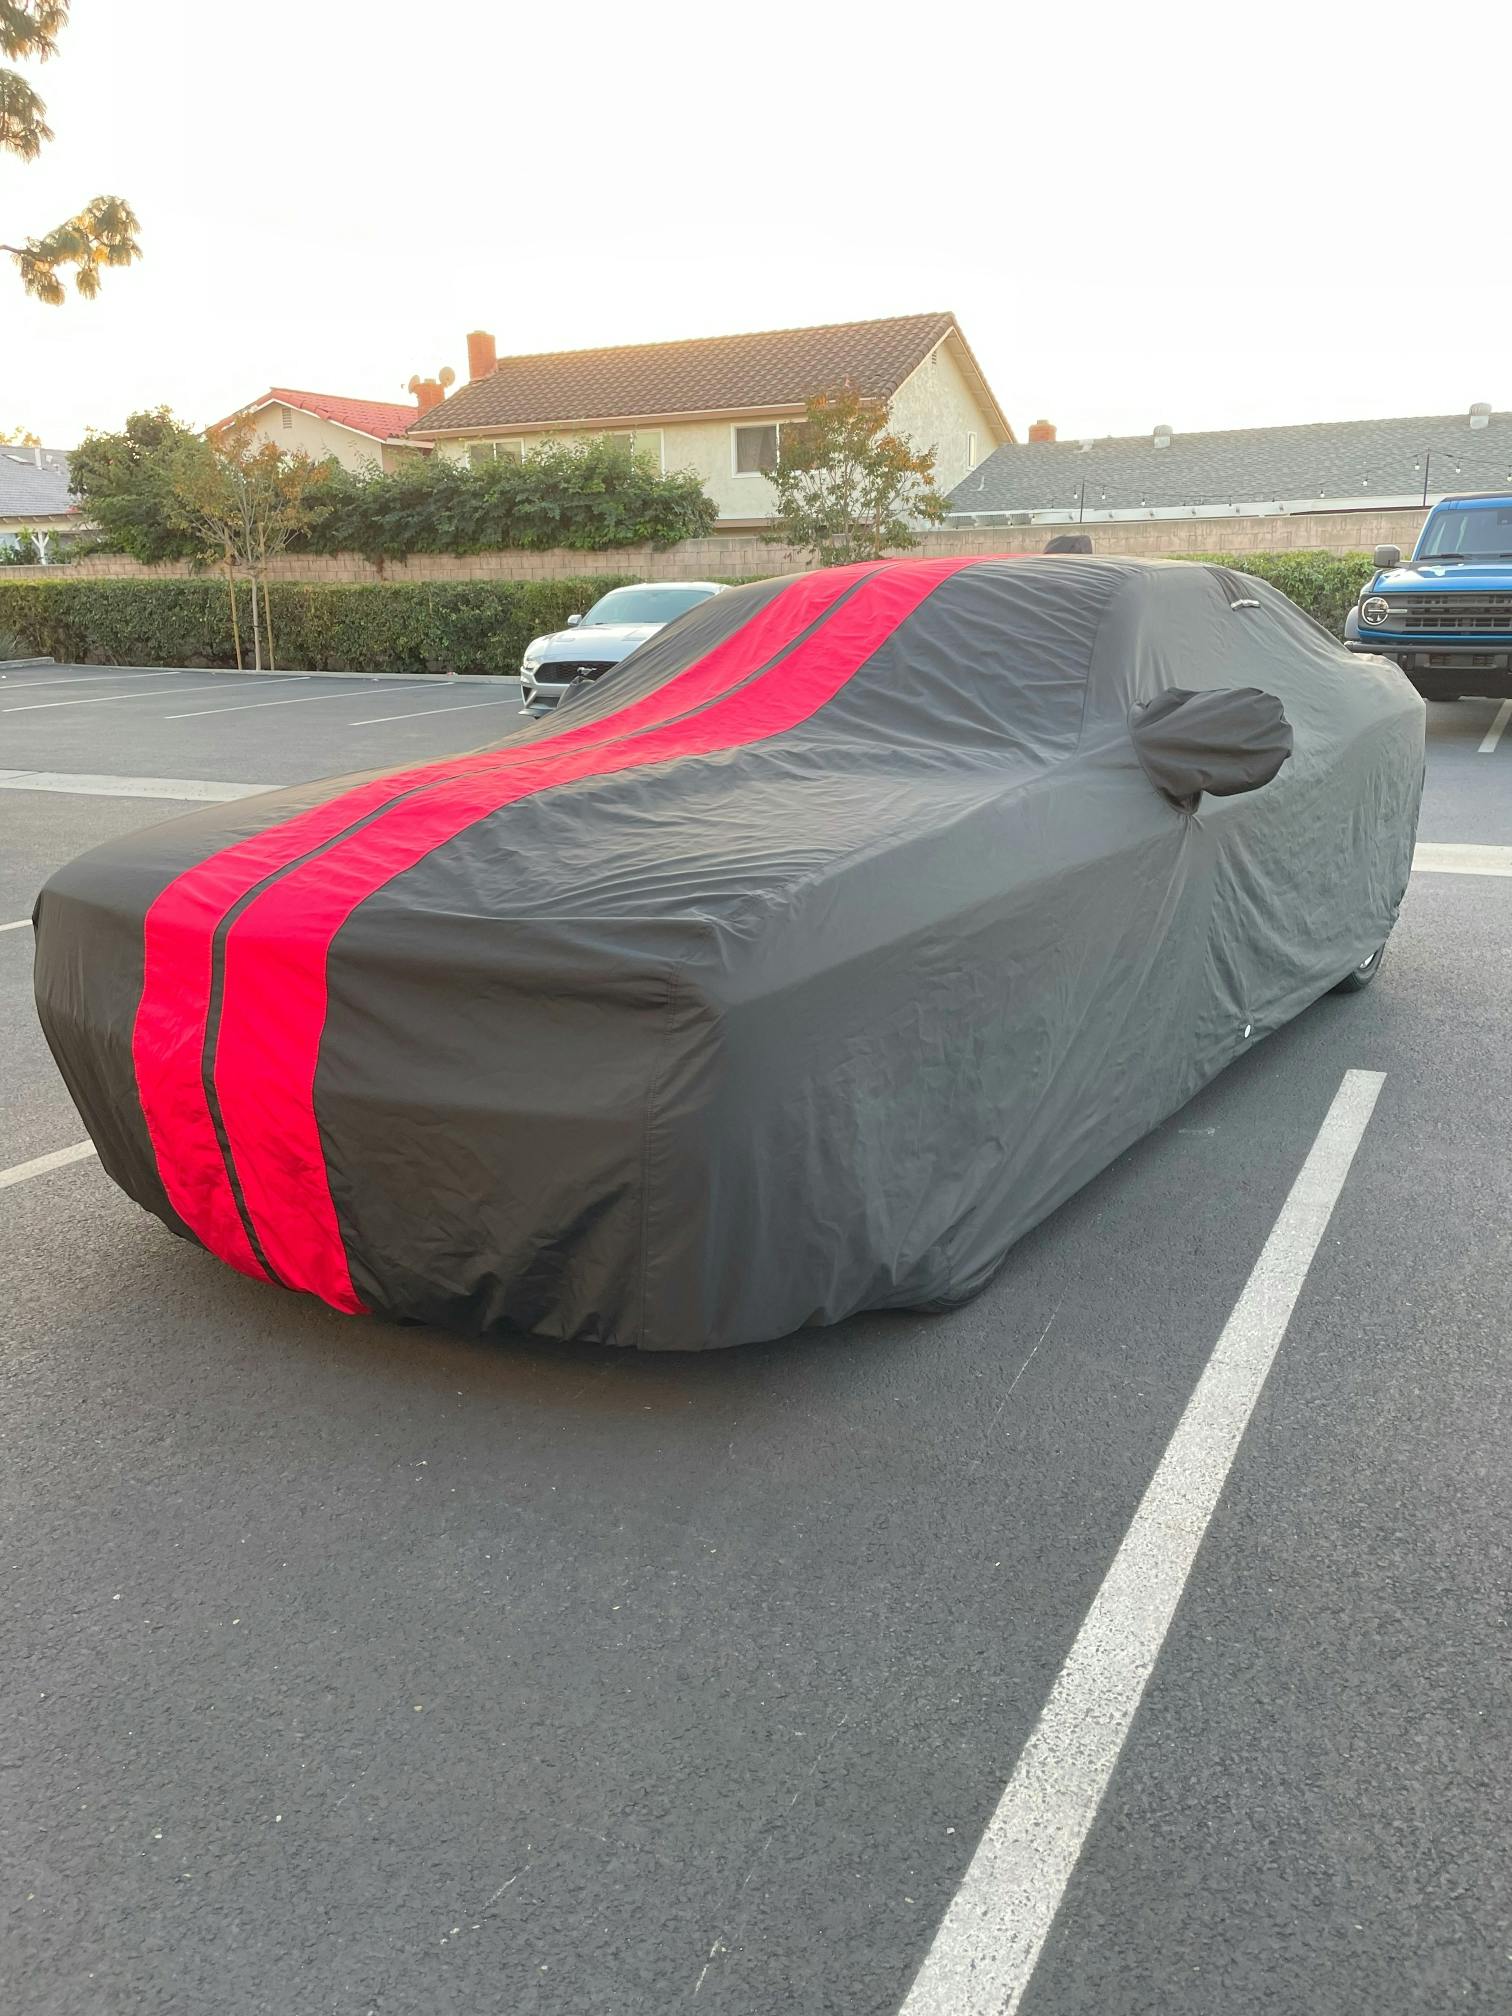 a fully-covered vehicle with a coverland car cover on it